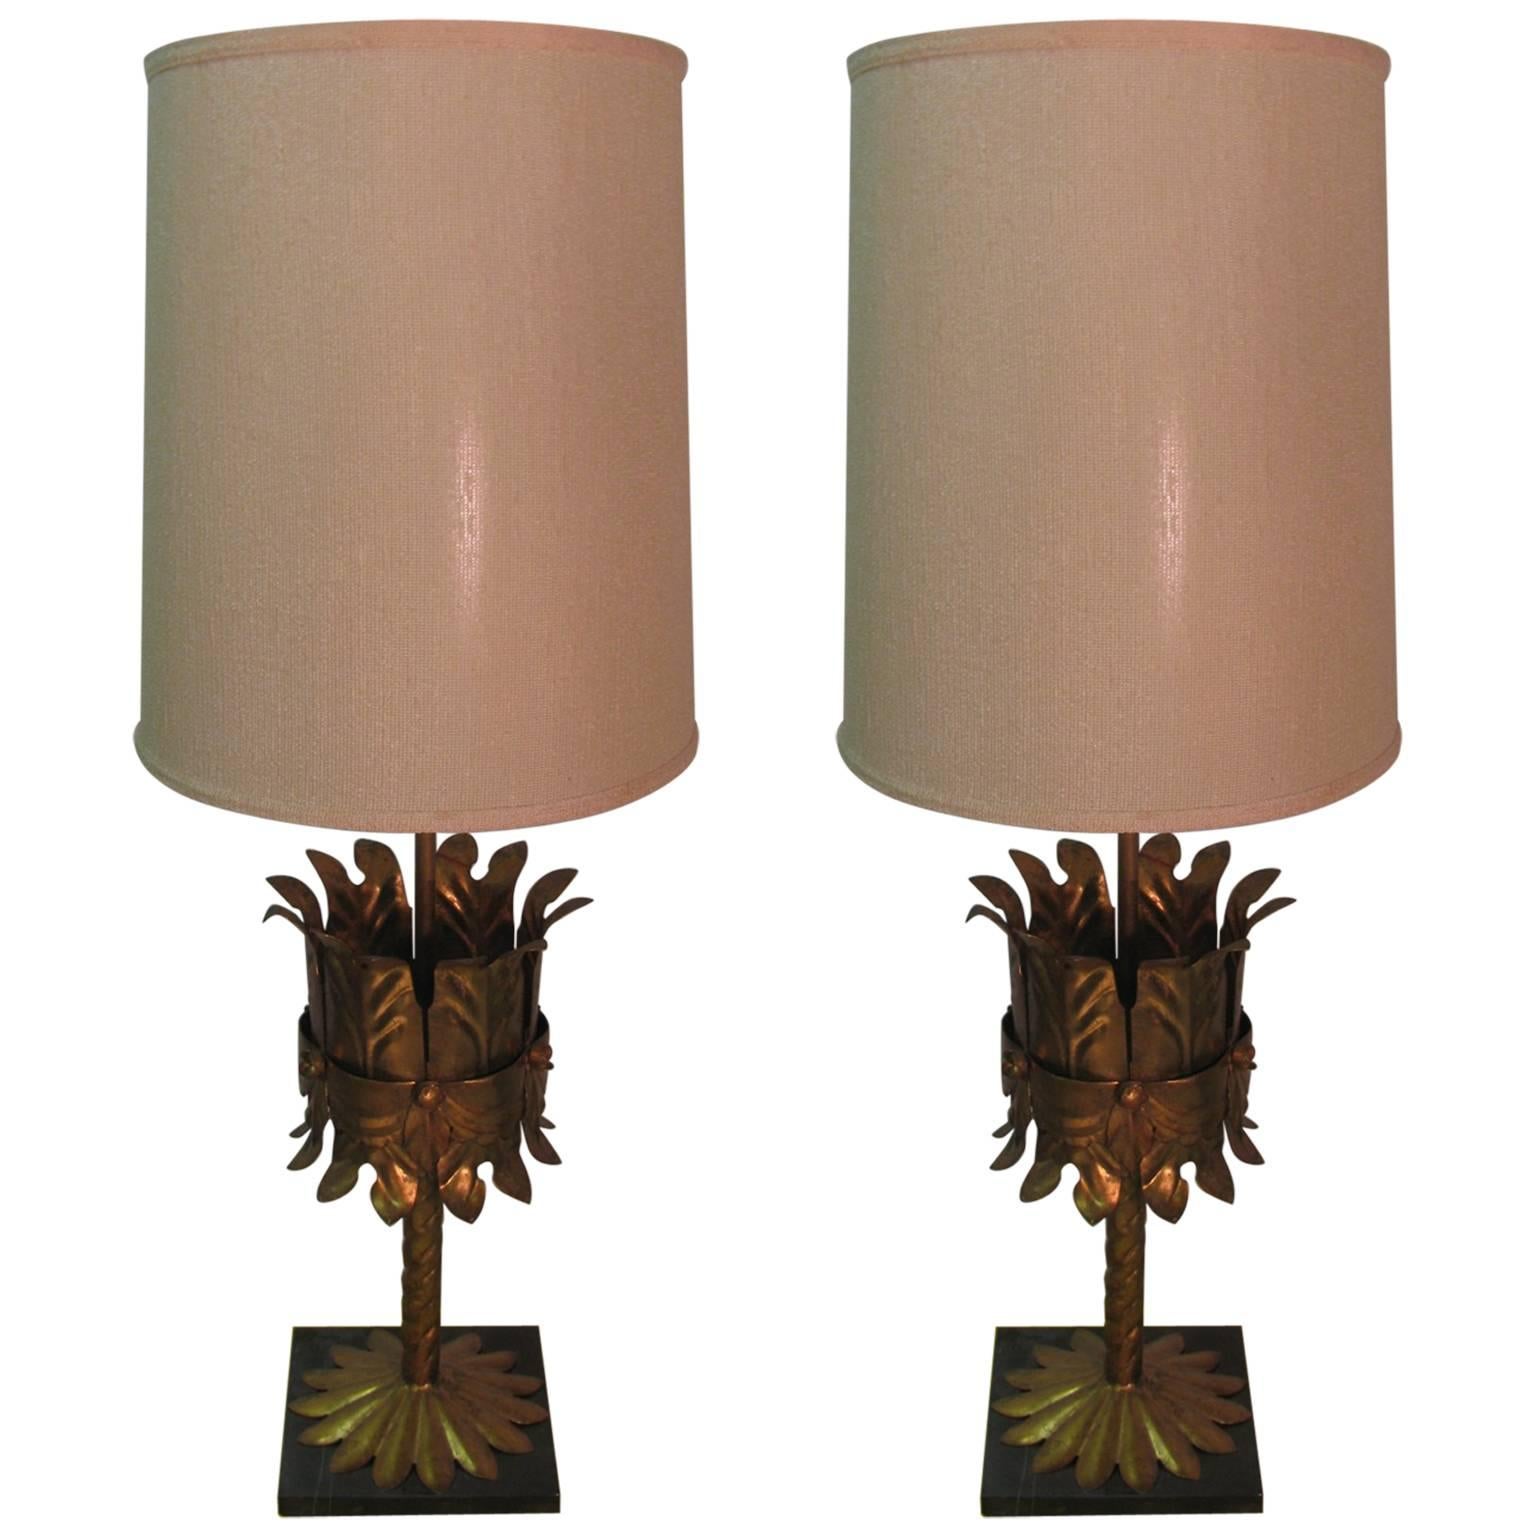 Pair of Hollywood Regency Italian Gilt Metal Table Lamps with Marble Plinth Base